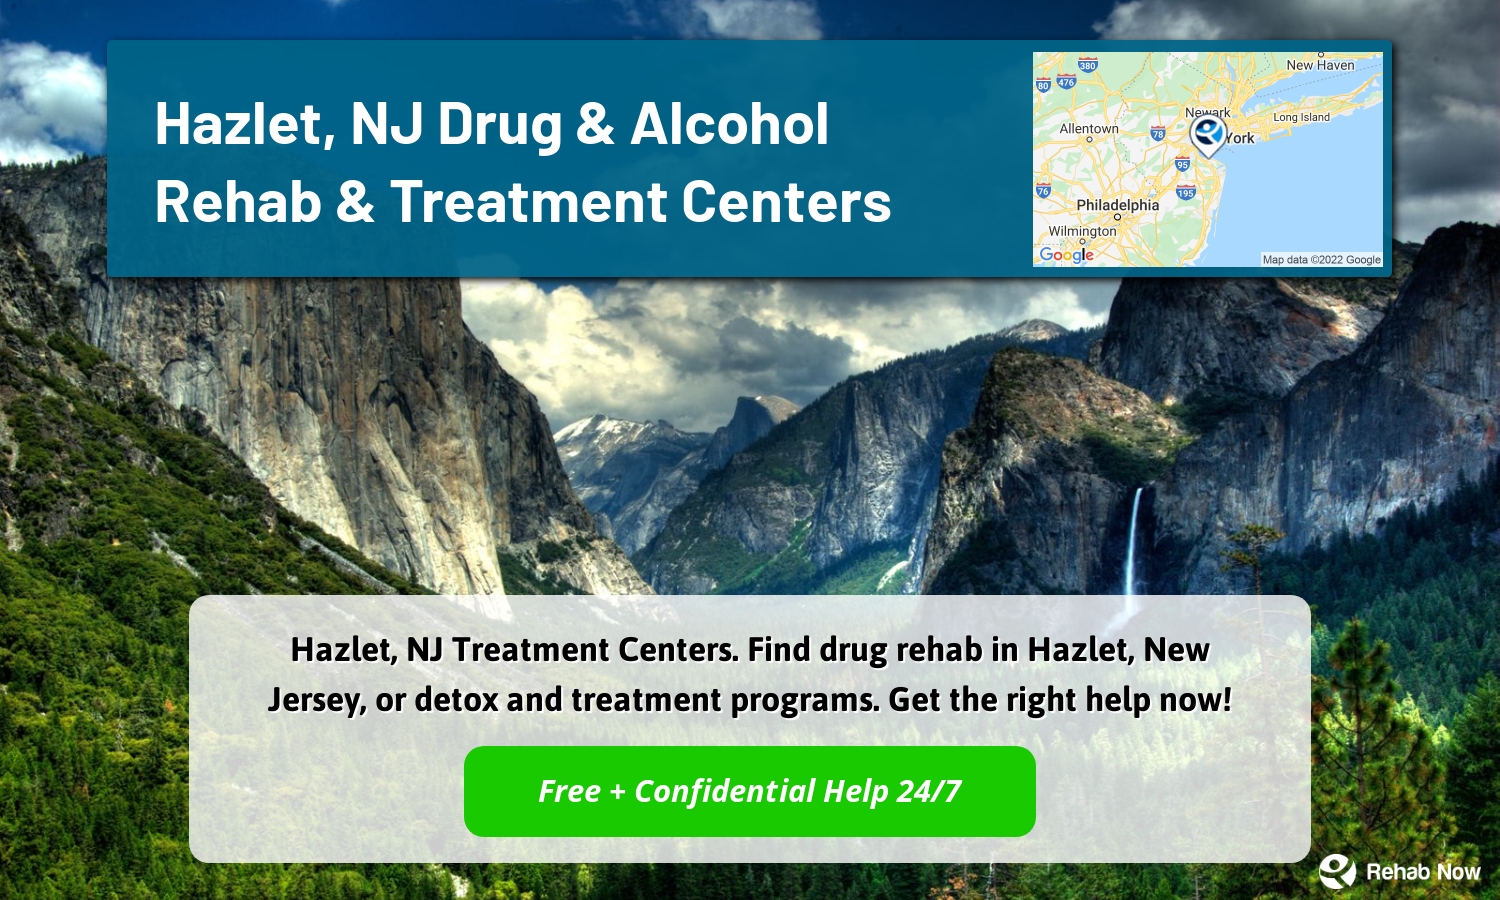 Hazlet, NJ Treatment Centers. Find drug rehab in Hazlet, New Jersey, or detox and treatment programs. Get the right help now!